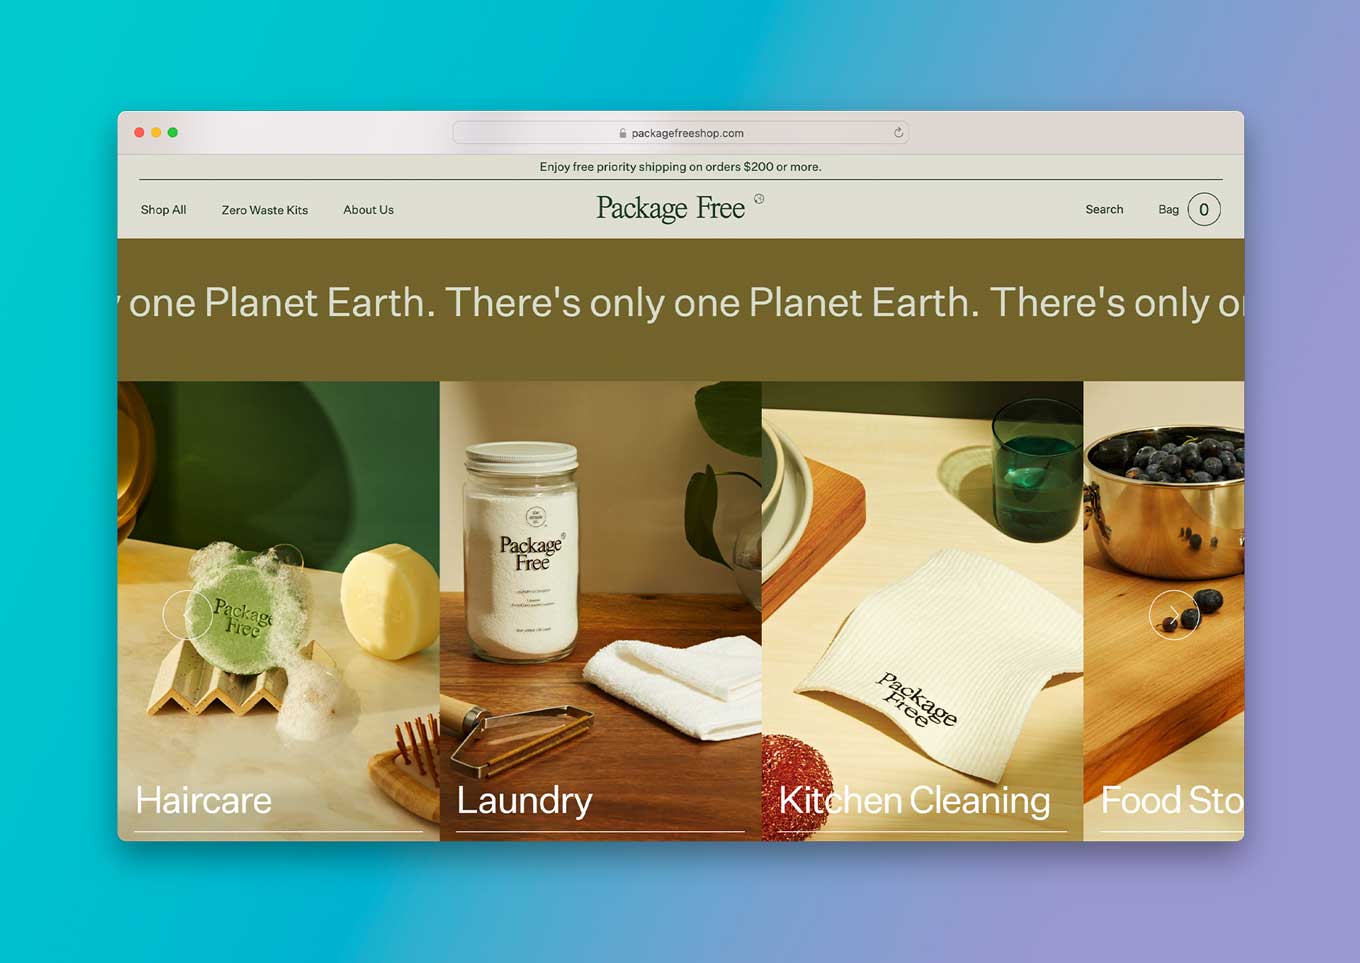 Package Free Shop Website: "There is only one Planet Earth"